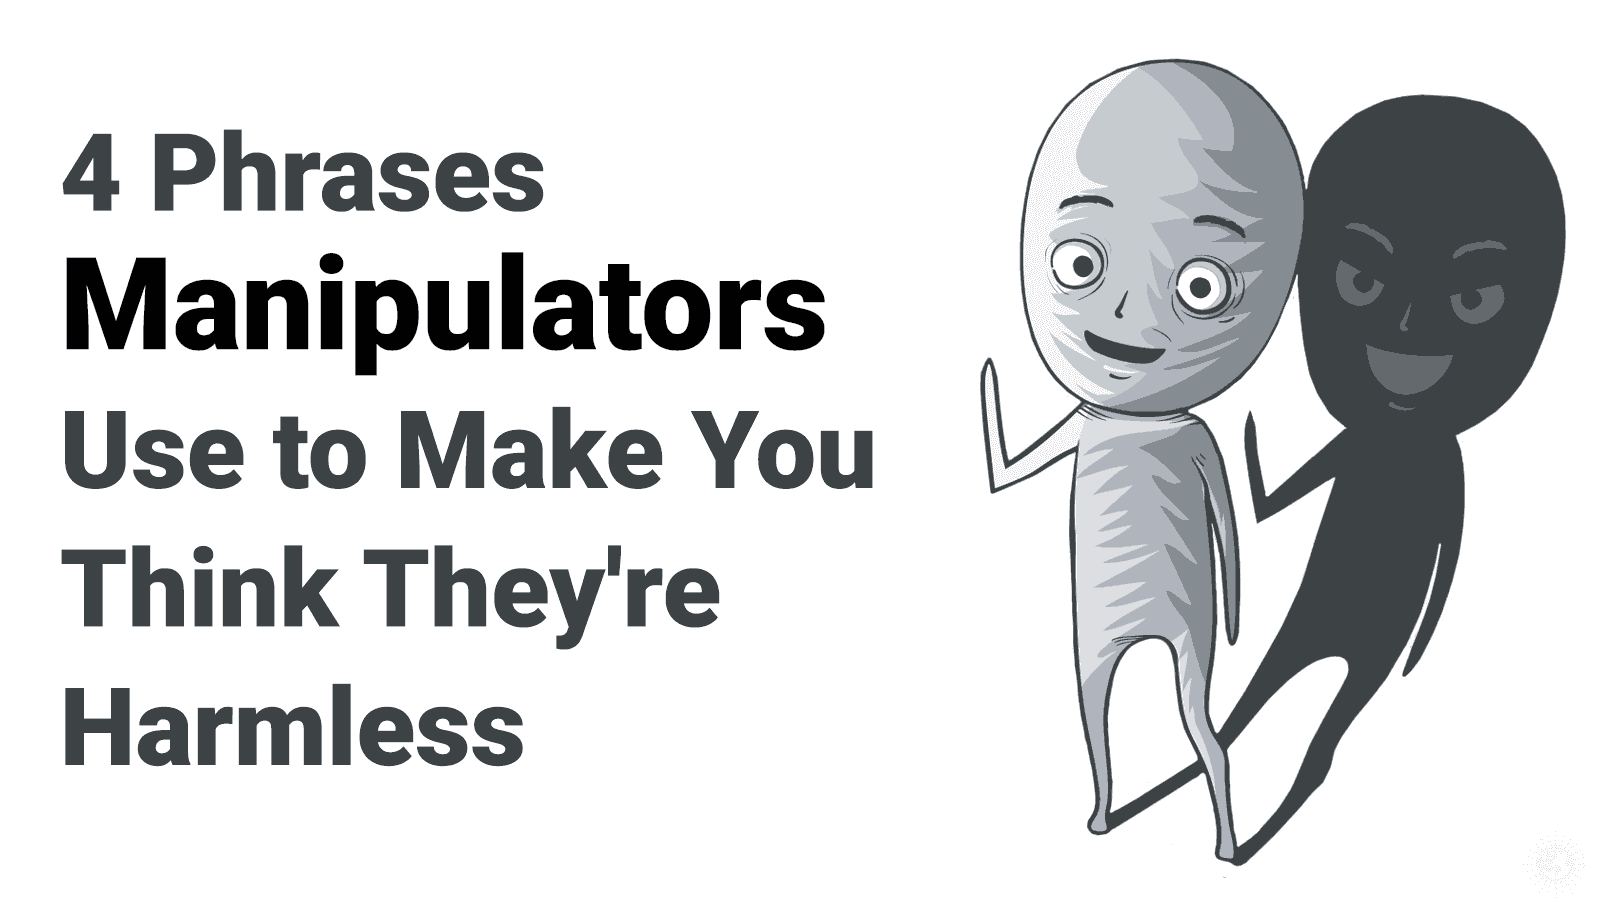 4 Phrases Manipulators Use to Make You Think They’re Harmless (And How to Respond)